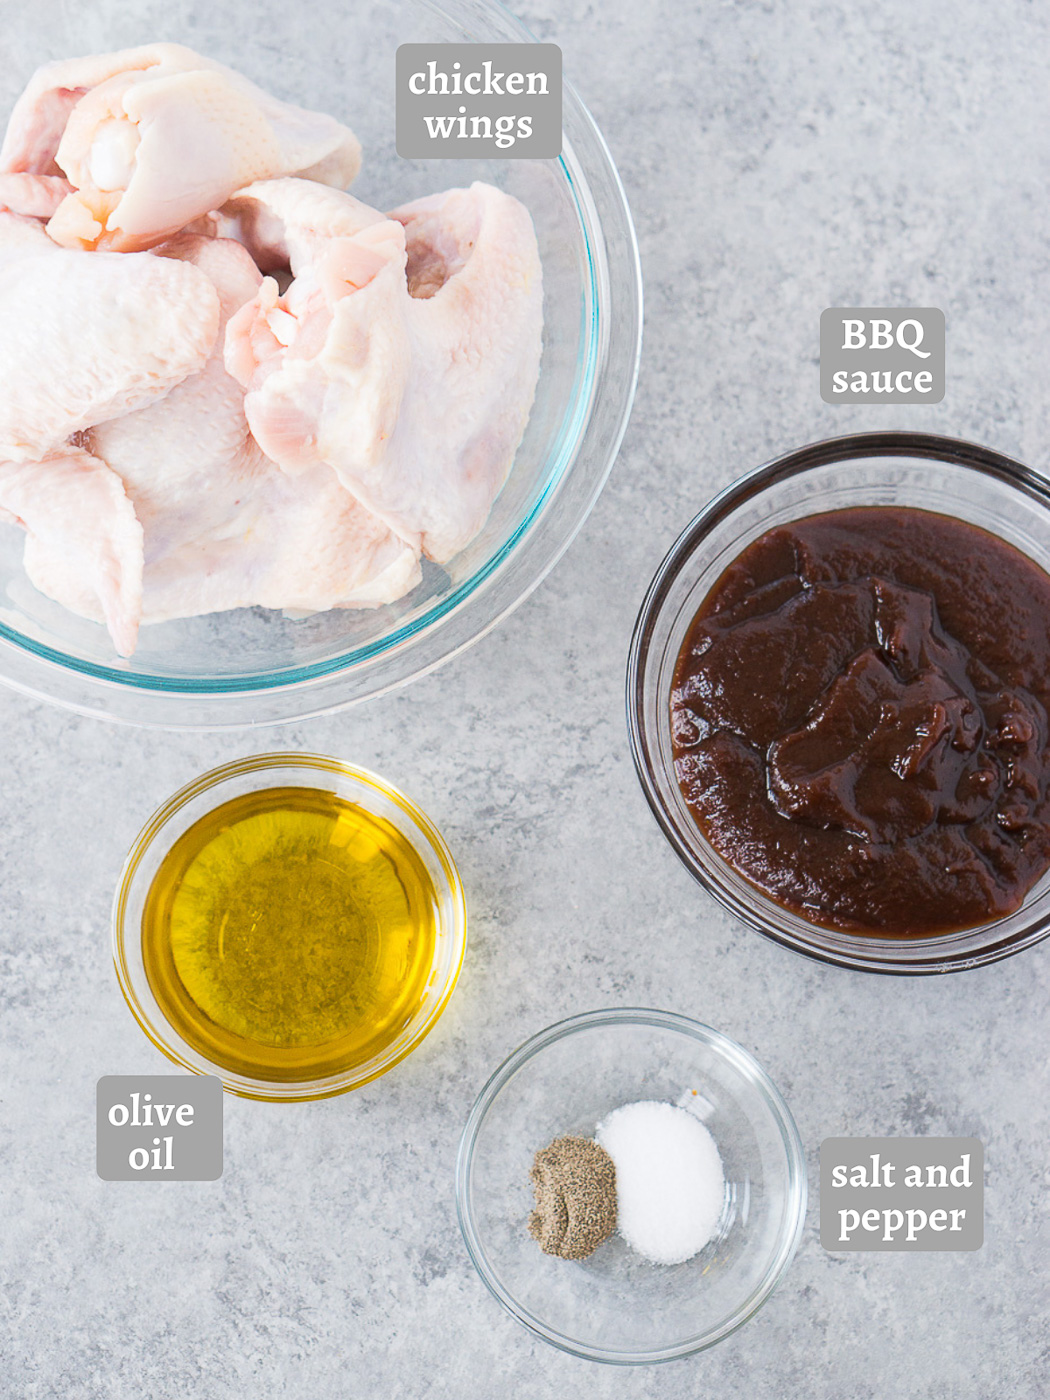 ingredients for baked chicken wings with bbq